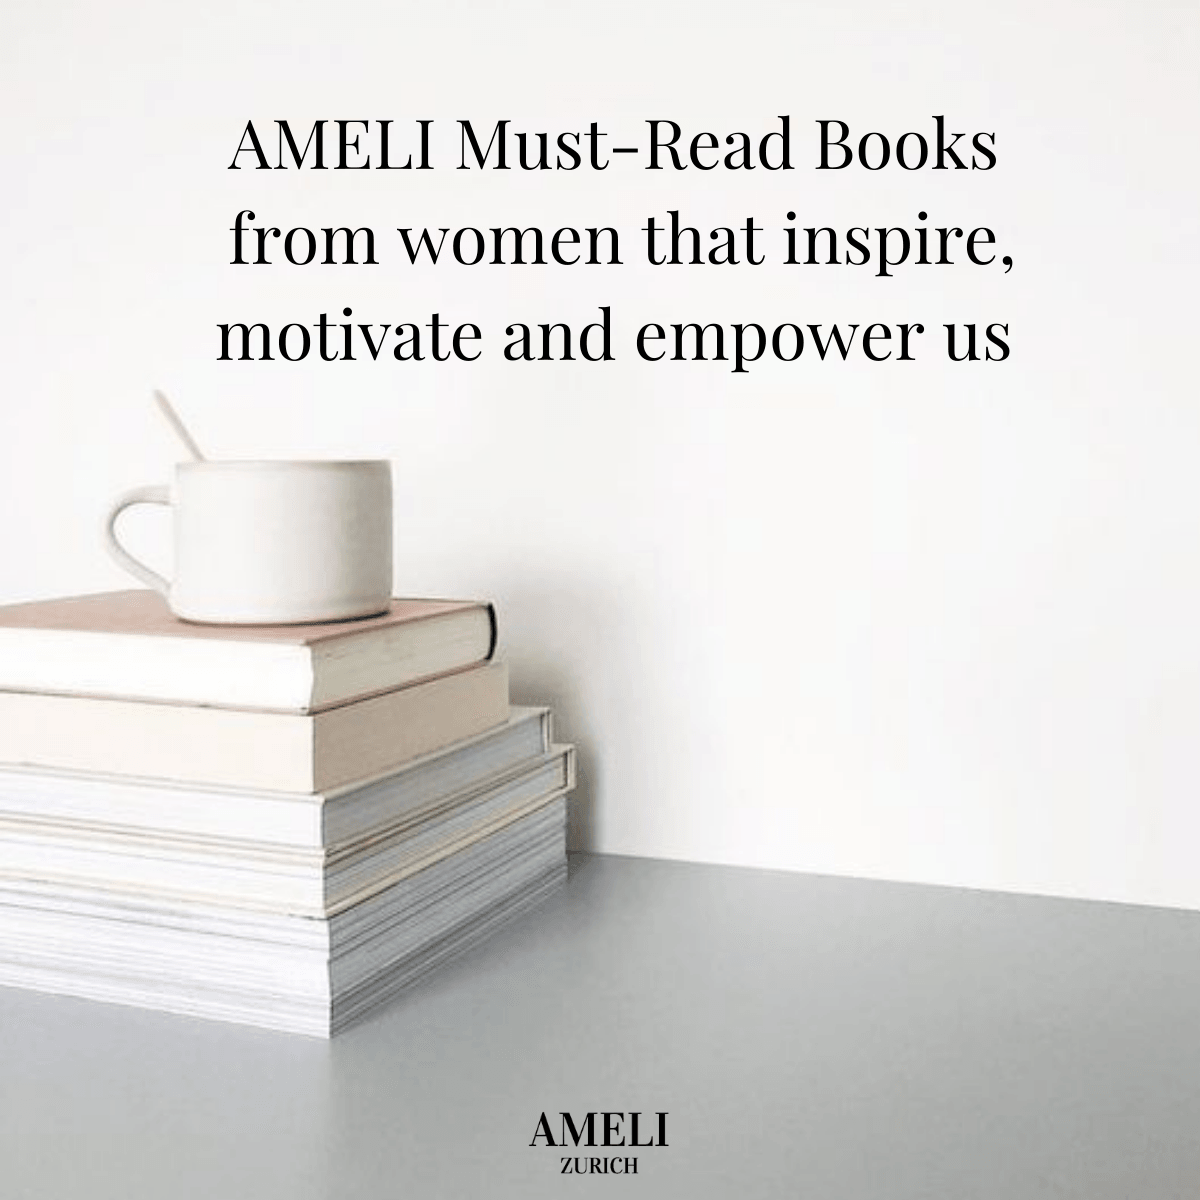 AMELI Must-Read books empowering and inspiring women 